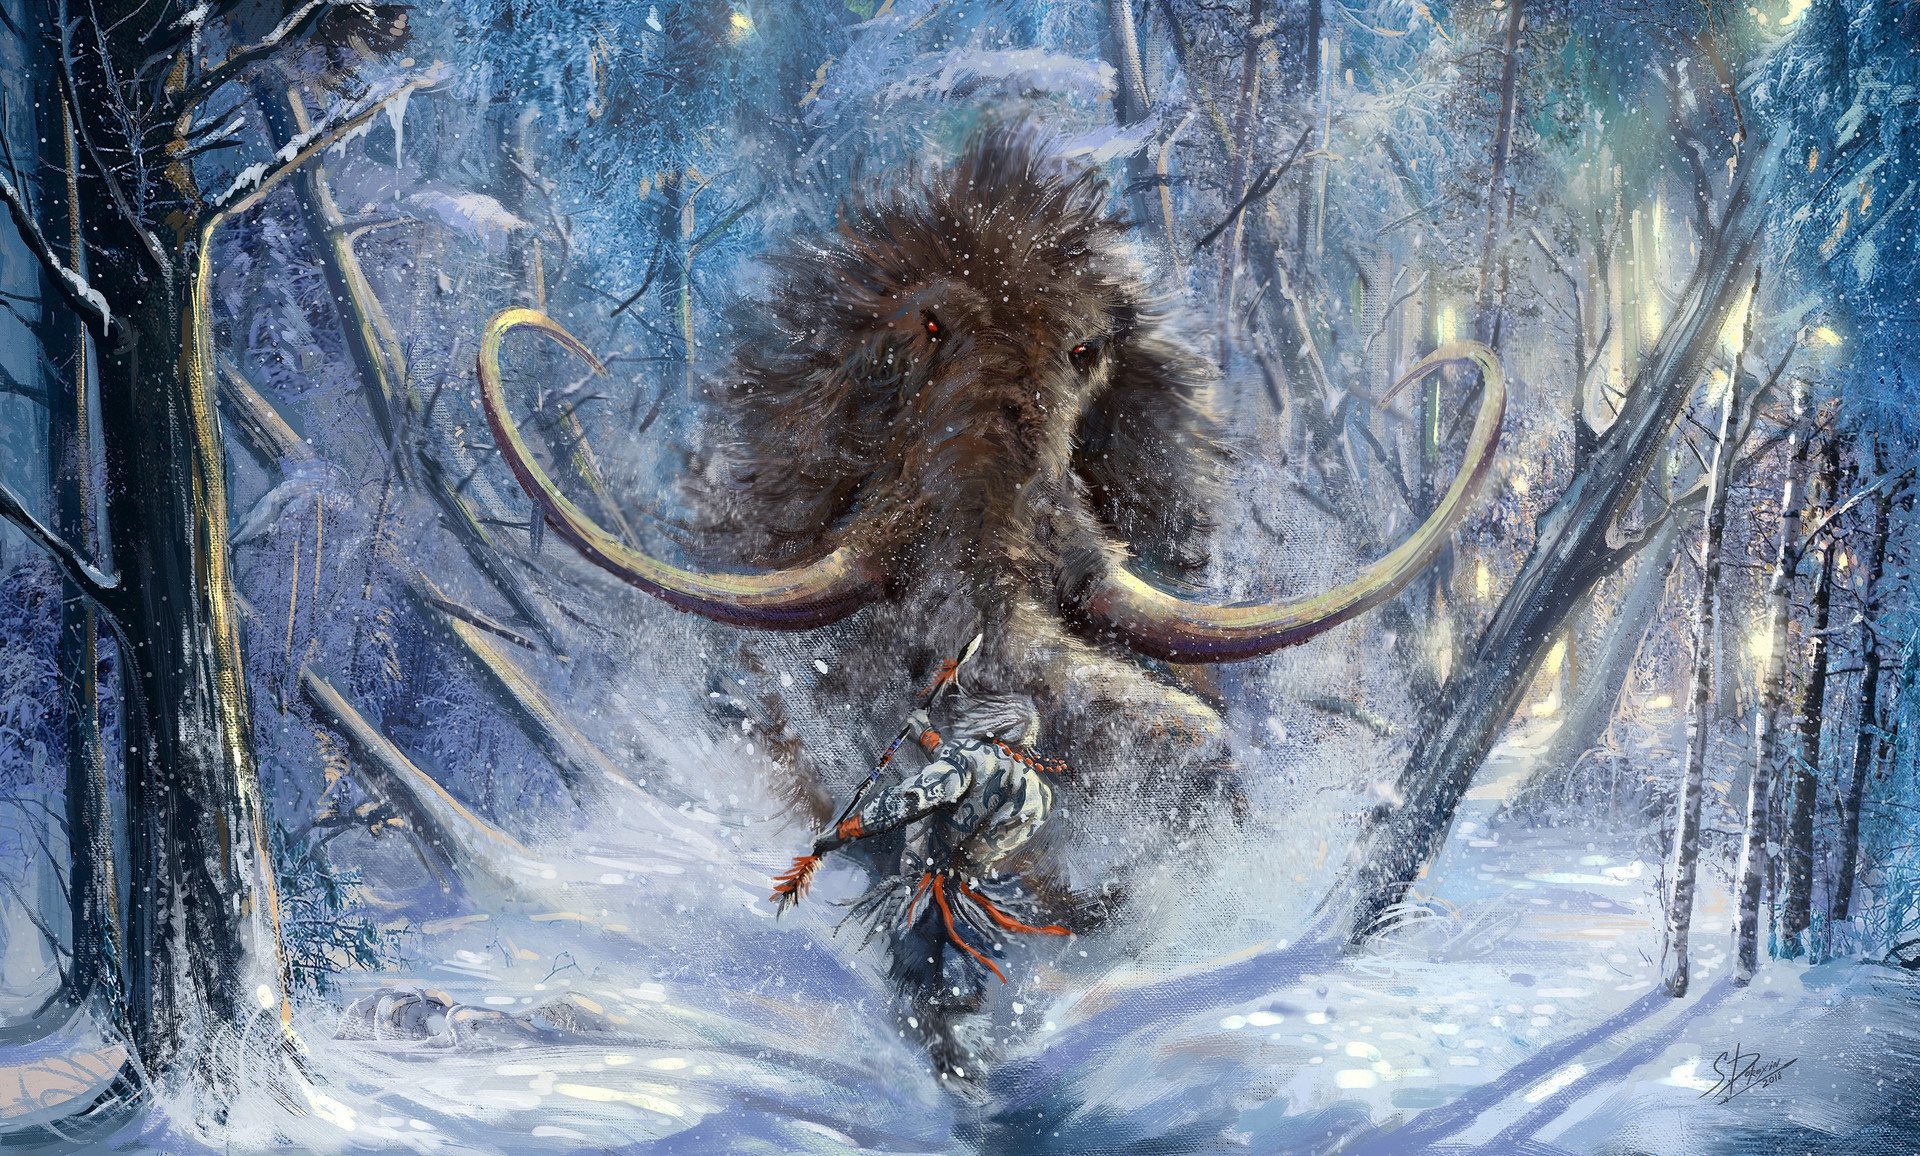 Tribal warrior fighting a woolly mammoth in the snow by Sergei Dorokhin